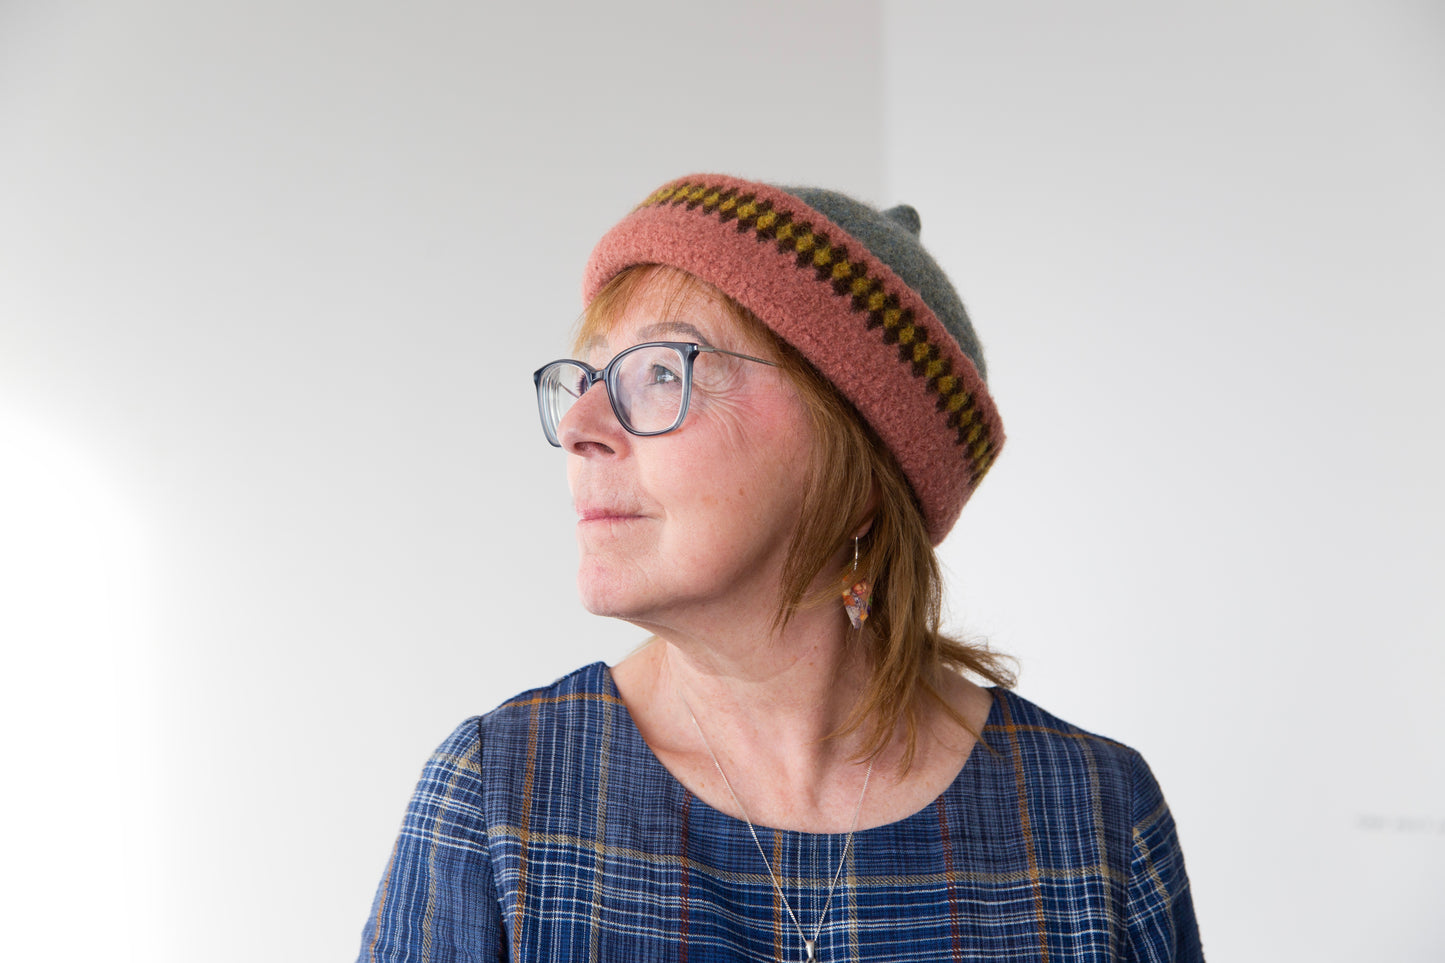 Pink patterned edge and grey top woollen hat